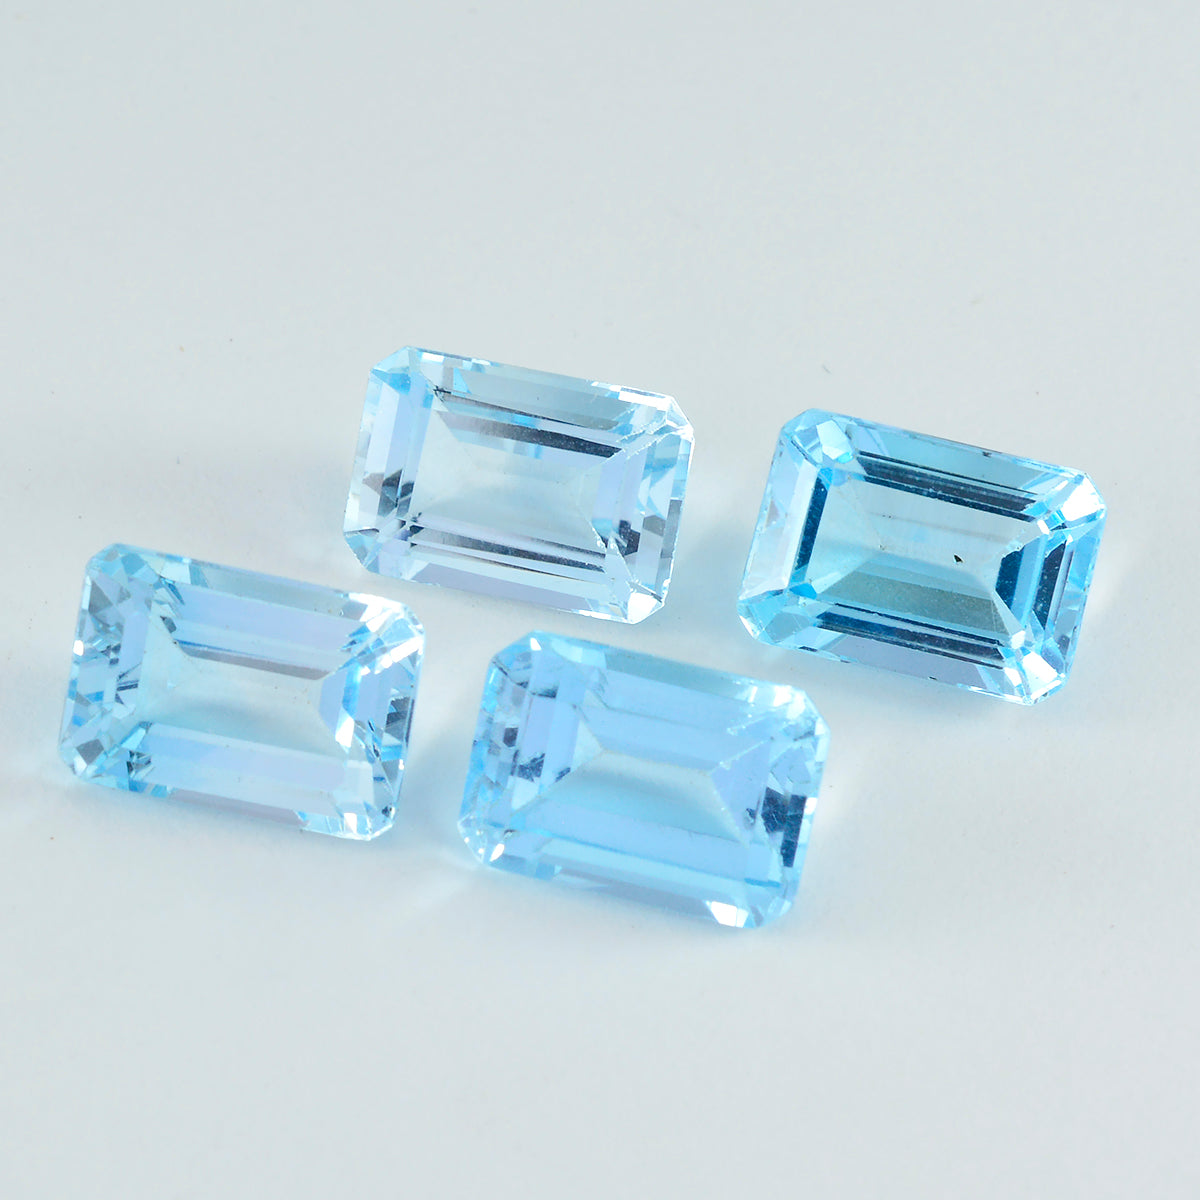 Riyogems 1PC Natural Blue Topaz Faceted 10X14 mm Octagon Shape nice-looking Quality Loose Stone